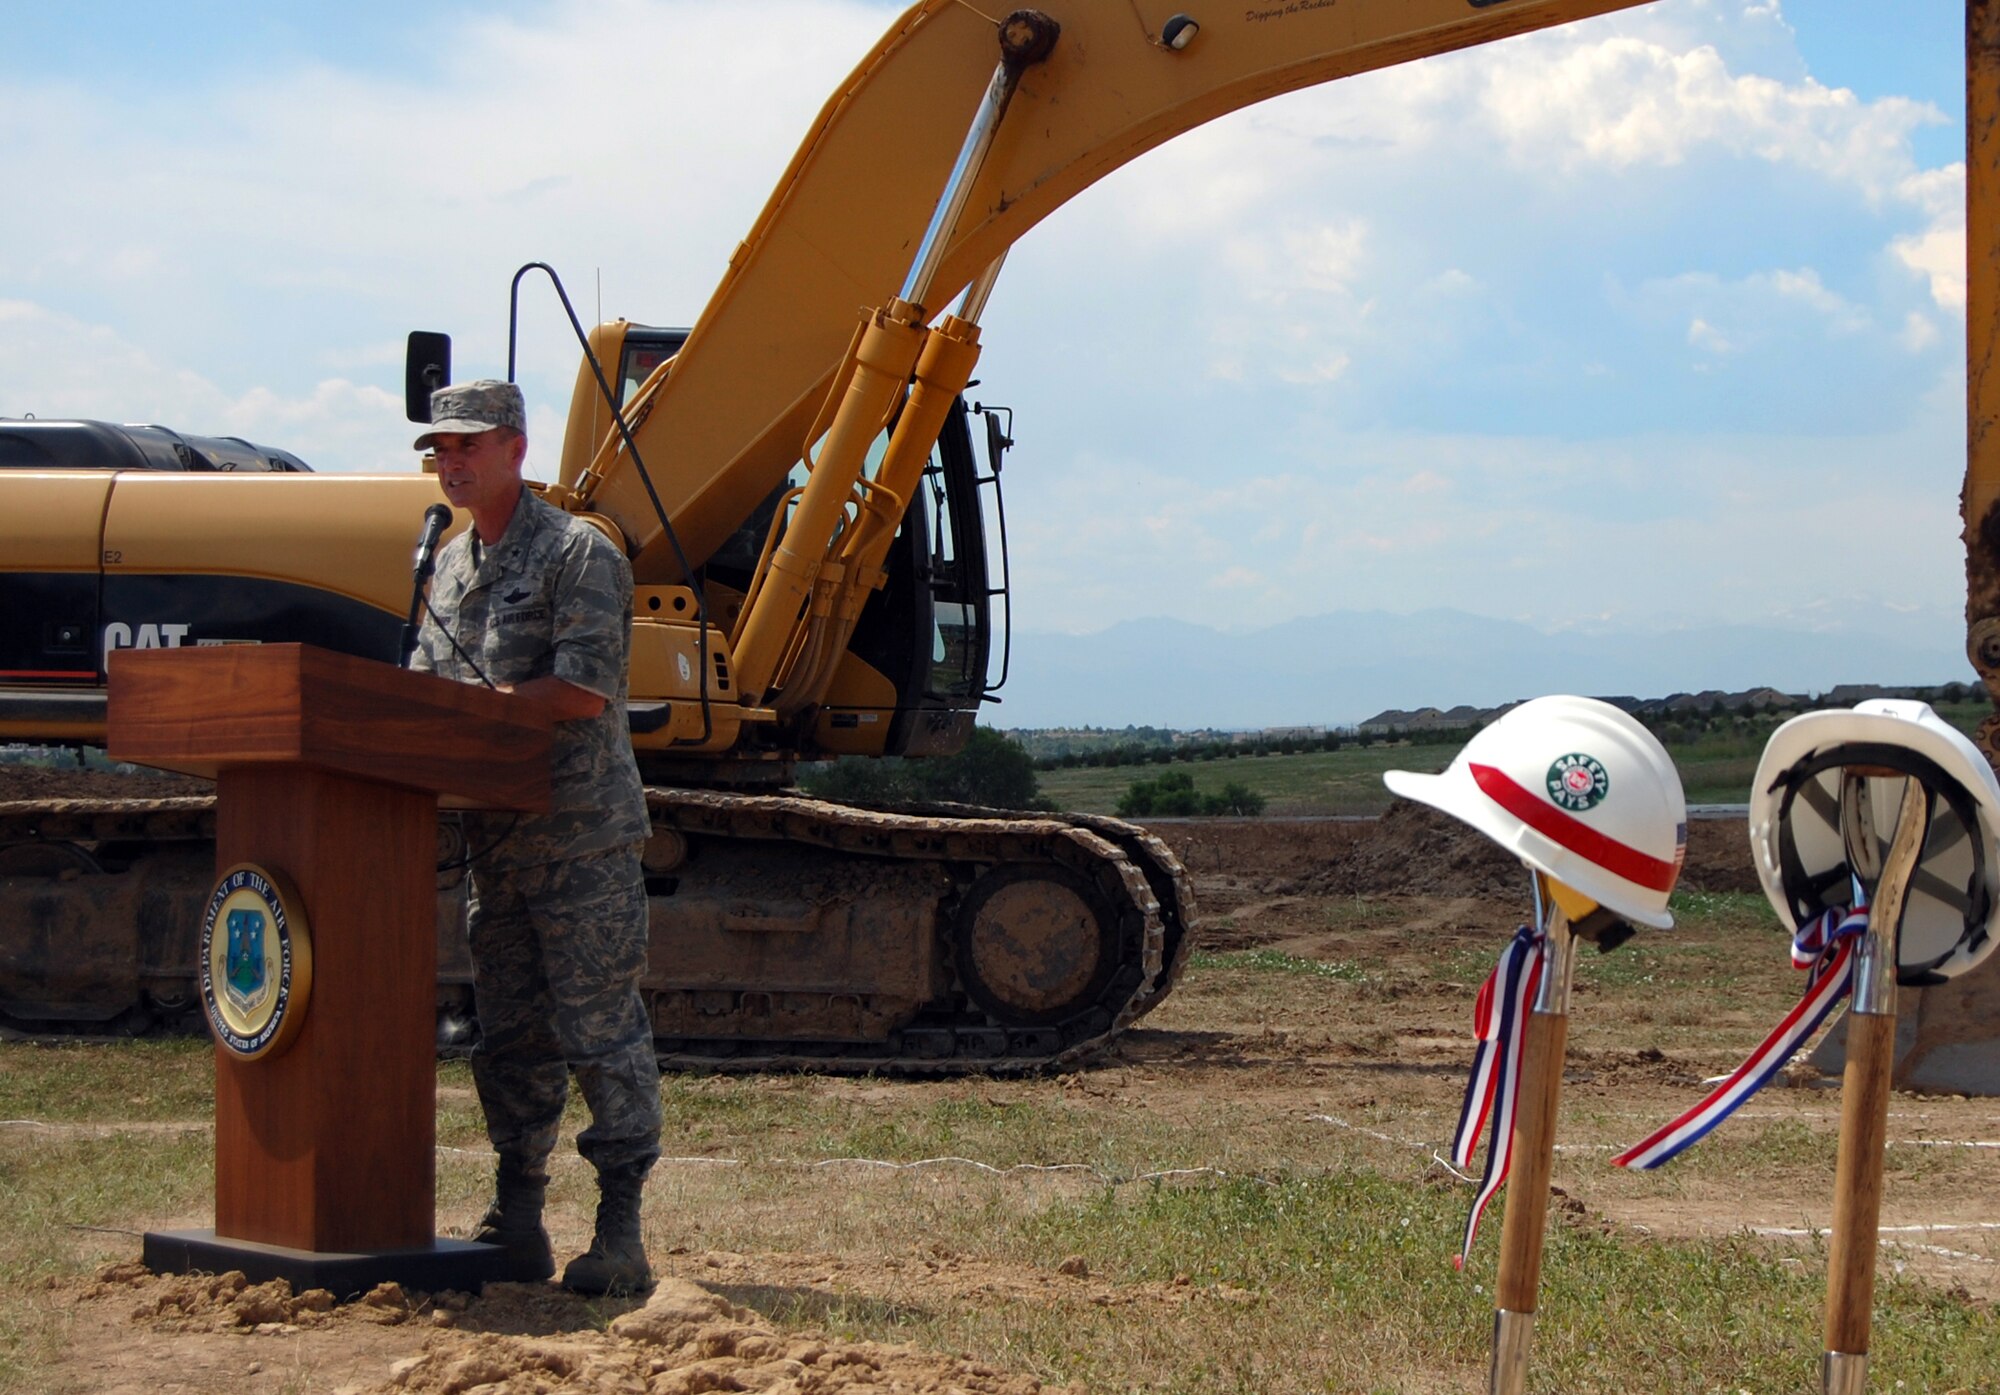 Brig. Gen. Kevin Pottinger, ARPC commander, speaks during the groundbreaking ceremony for ARPC's new building at Buckley Air Force Base on July 23. The ceremony marked the beginning of an estimated $17 million, two-year construction project to build a new facility for ARPC. (U.S. Air Force photo/Ellen Edwards) 